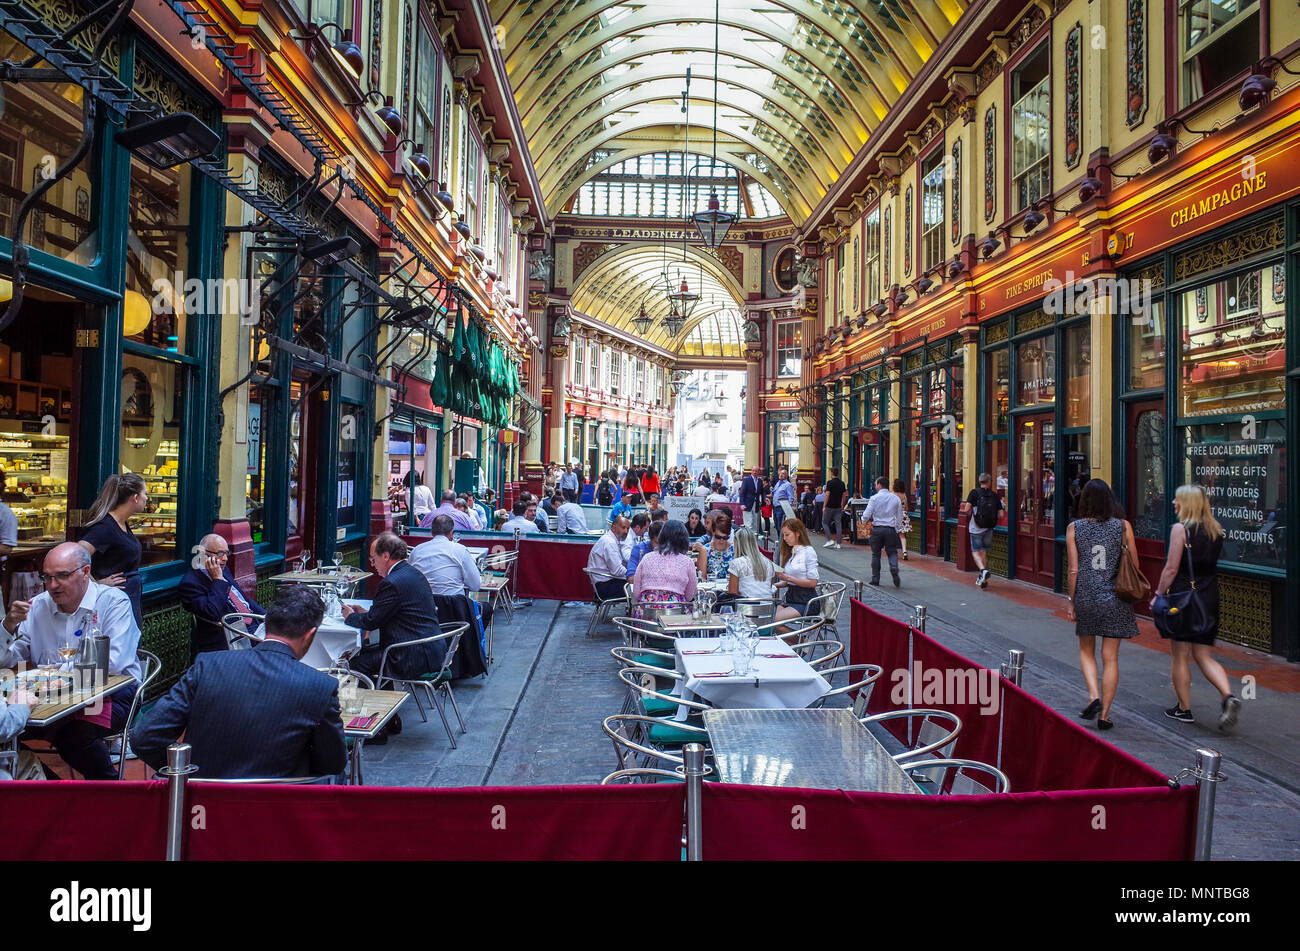 Leadenhall Market London - City workers enjoy food and drink in London's historic Leadenhall Market in the heart of the City of London financial area. Stock Photo